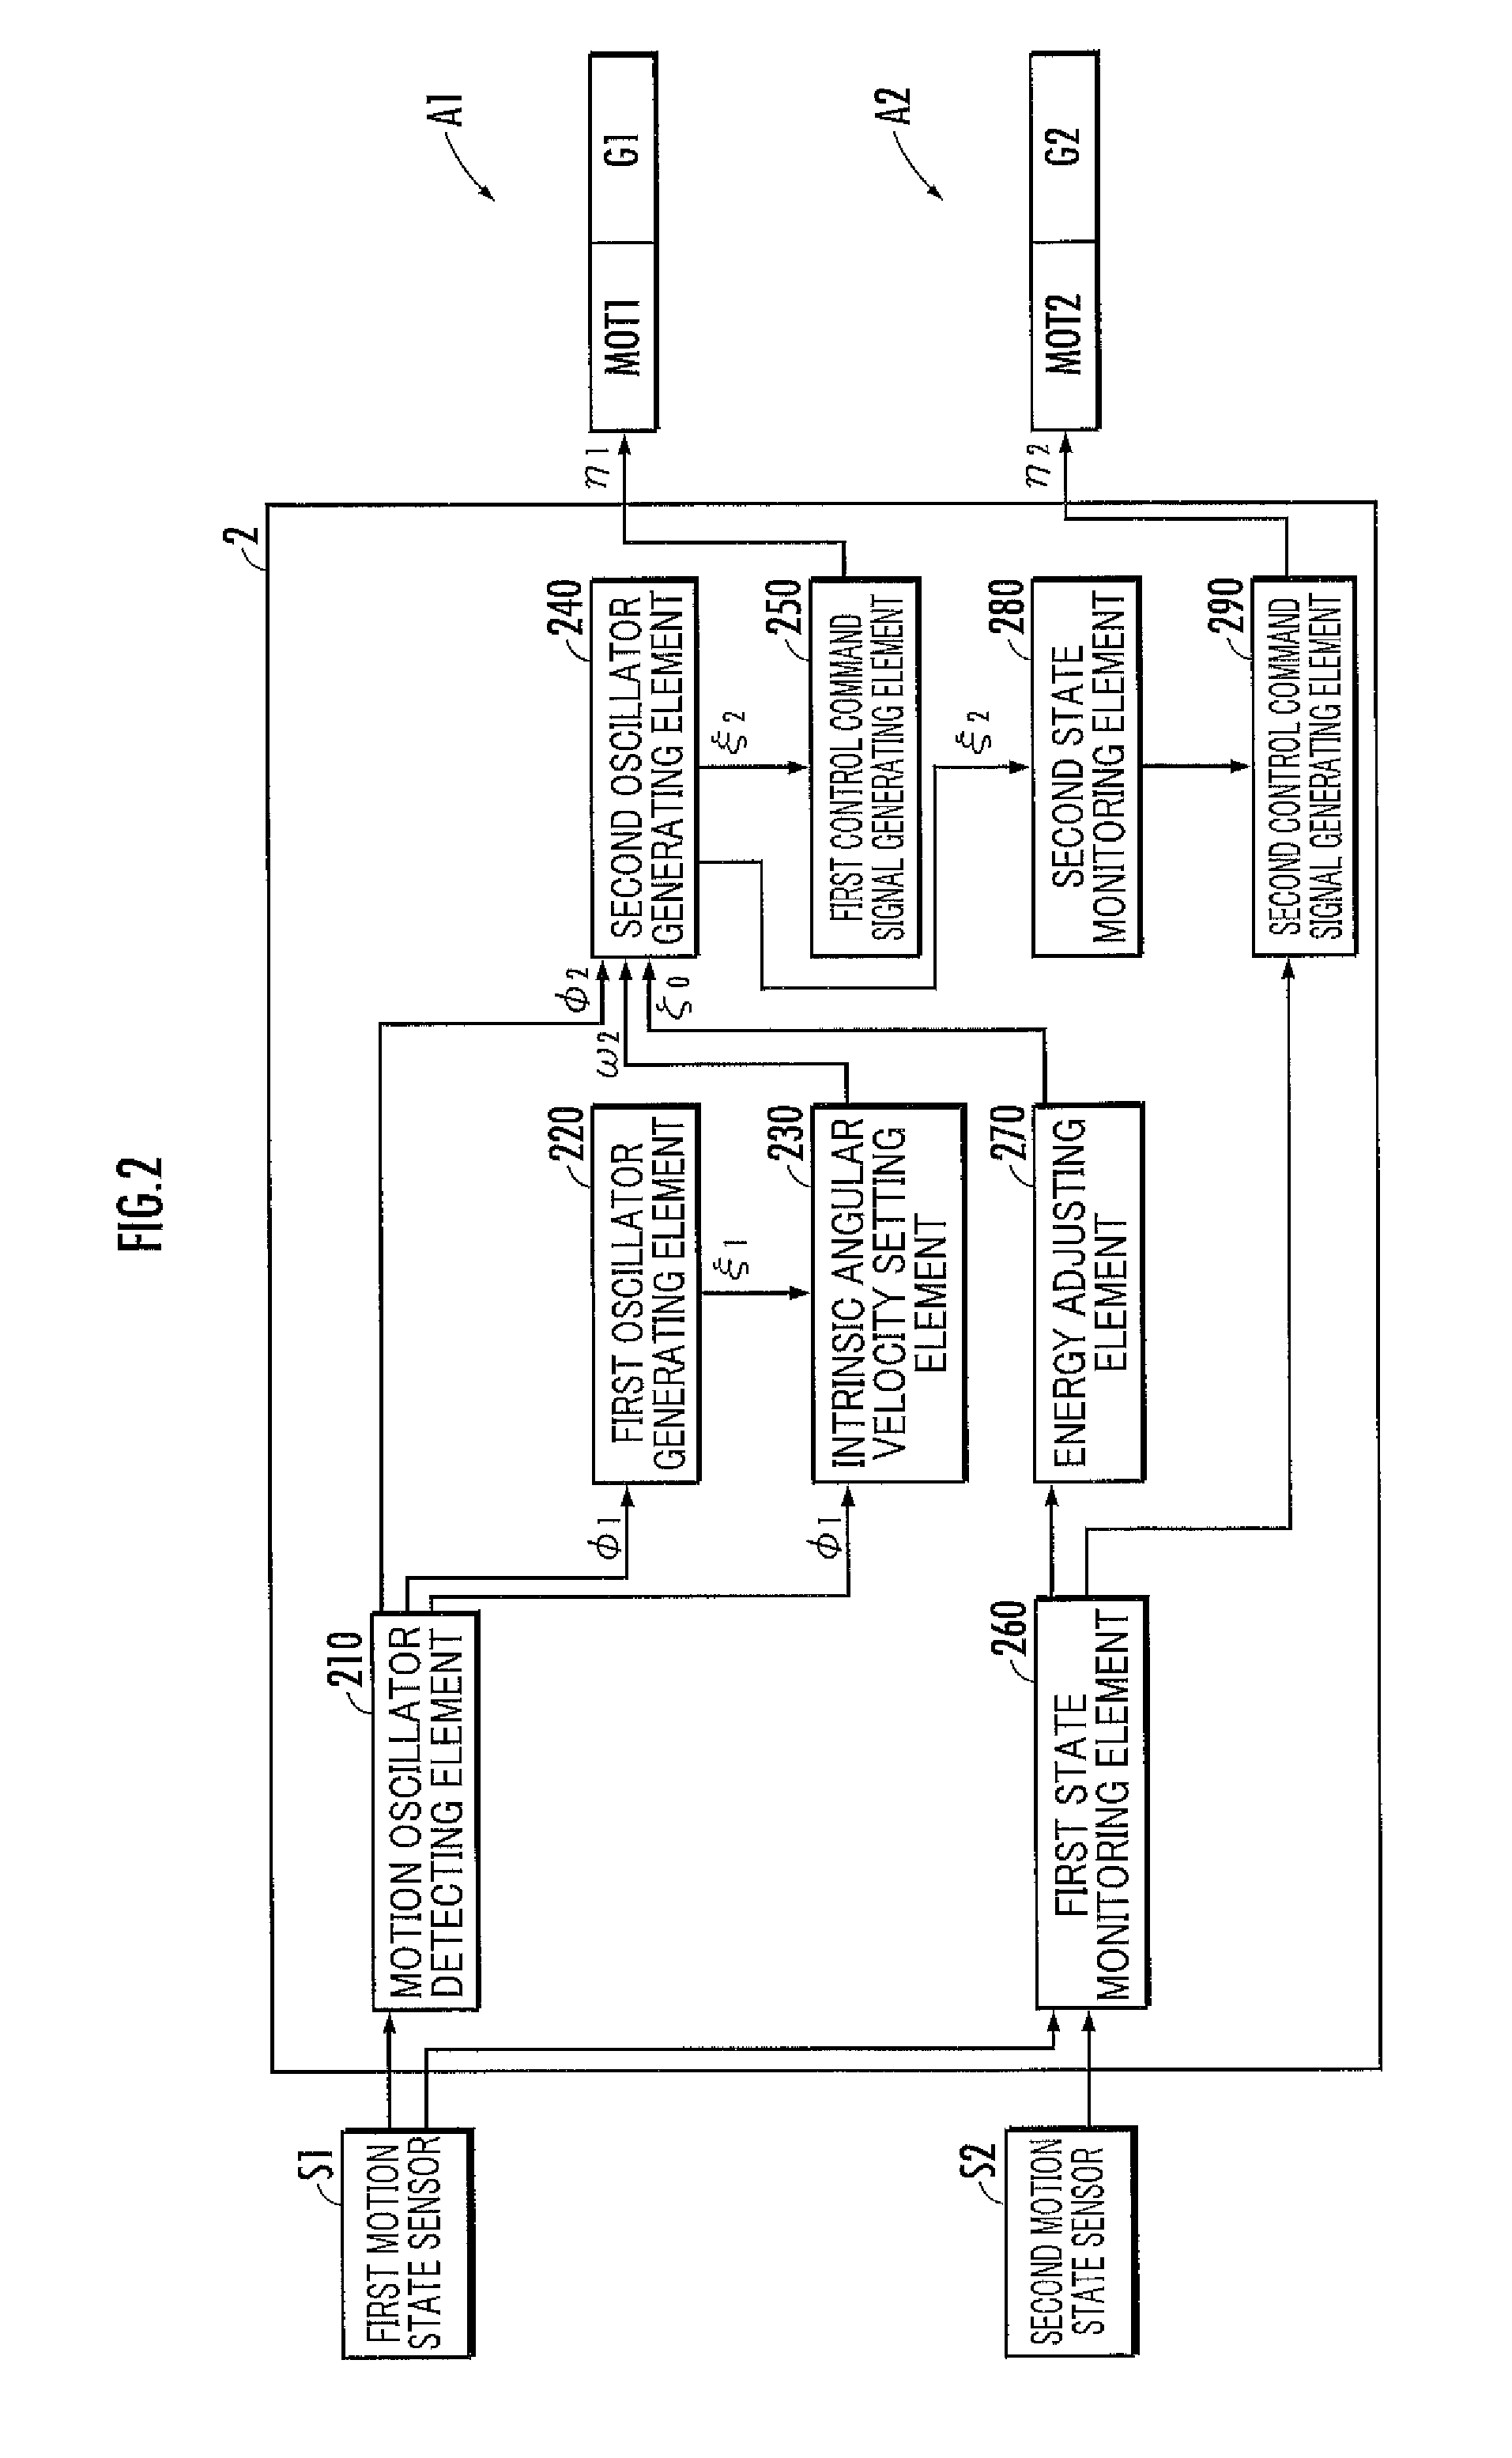 Walking motion assisting device